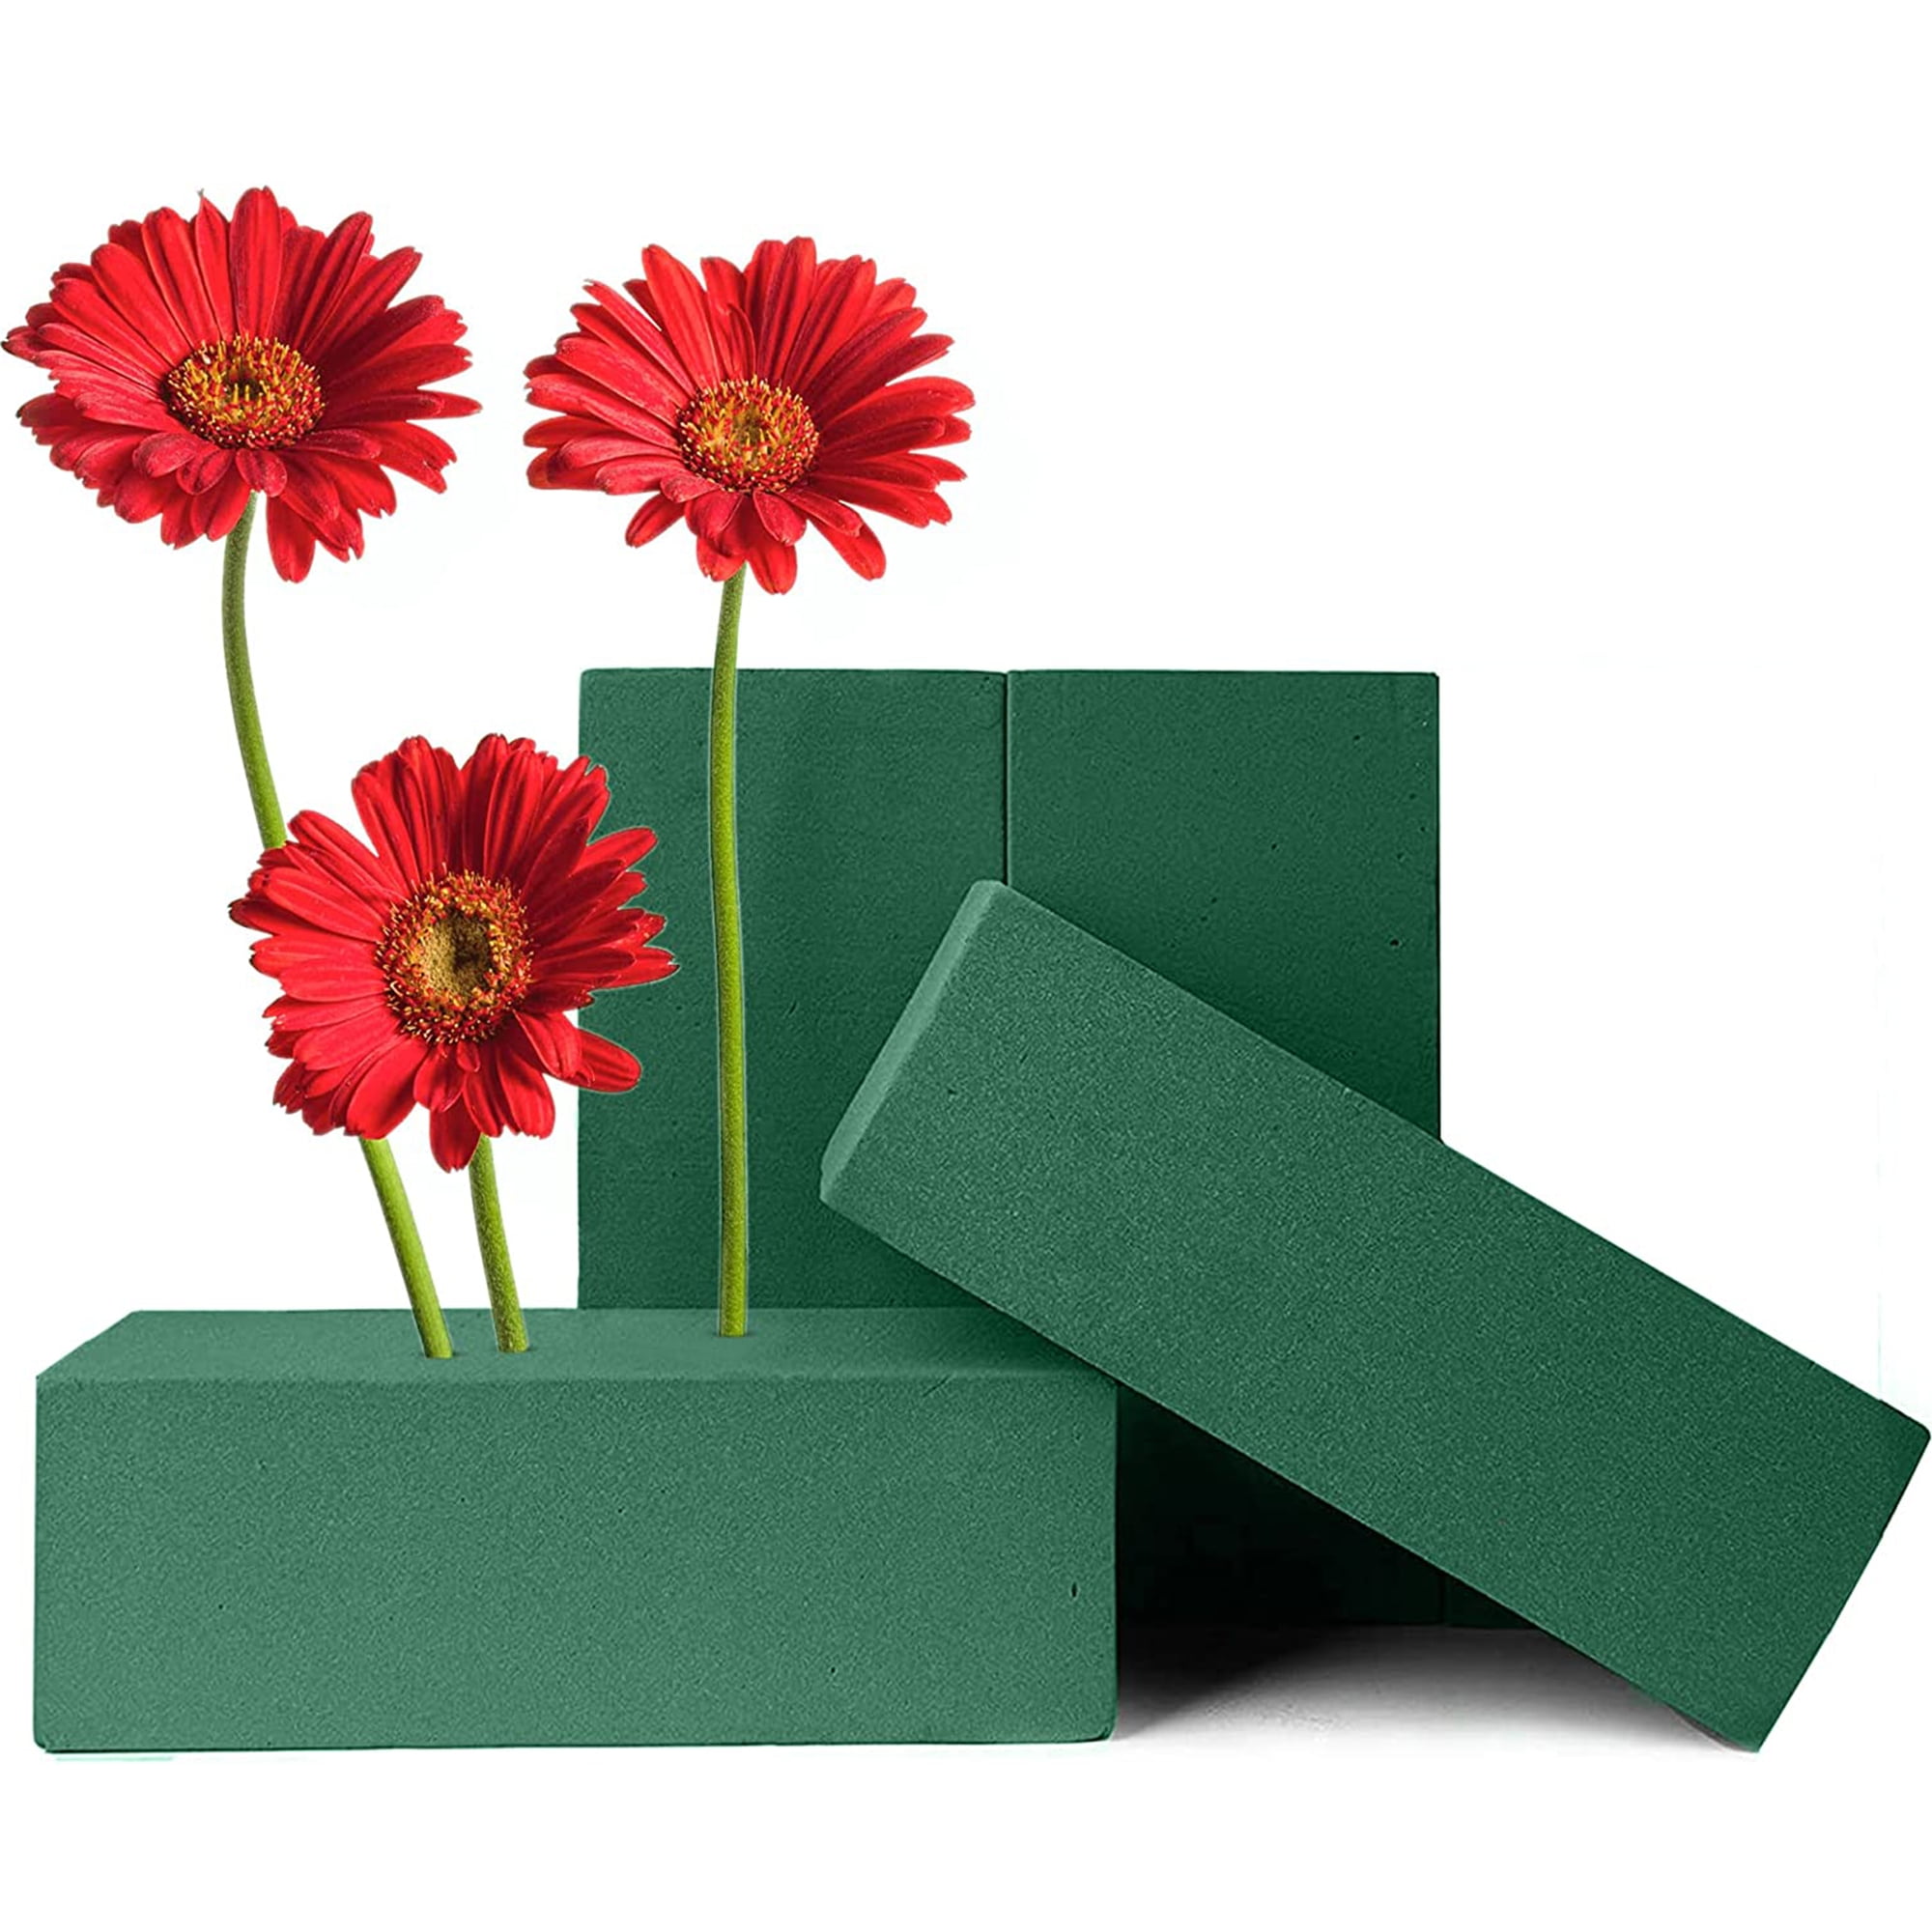 Home Dry and Wet Floral Foam Blocks Birthdays 9” L x 4” W x 3” H for Wedding Office and Garden Decorations FLOFARE Pack of 3 Floral Foam for Fresh and Artificial Flowers 